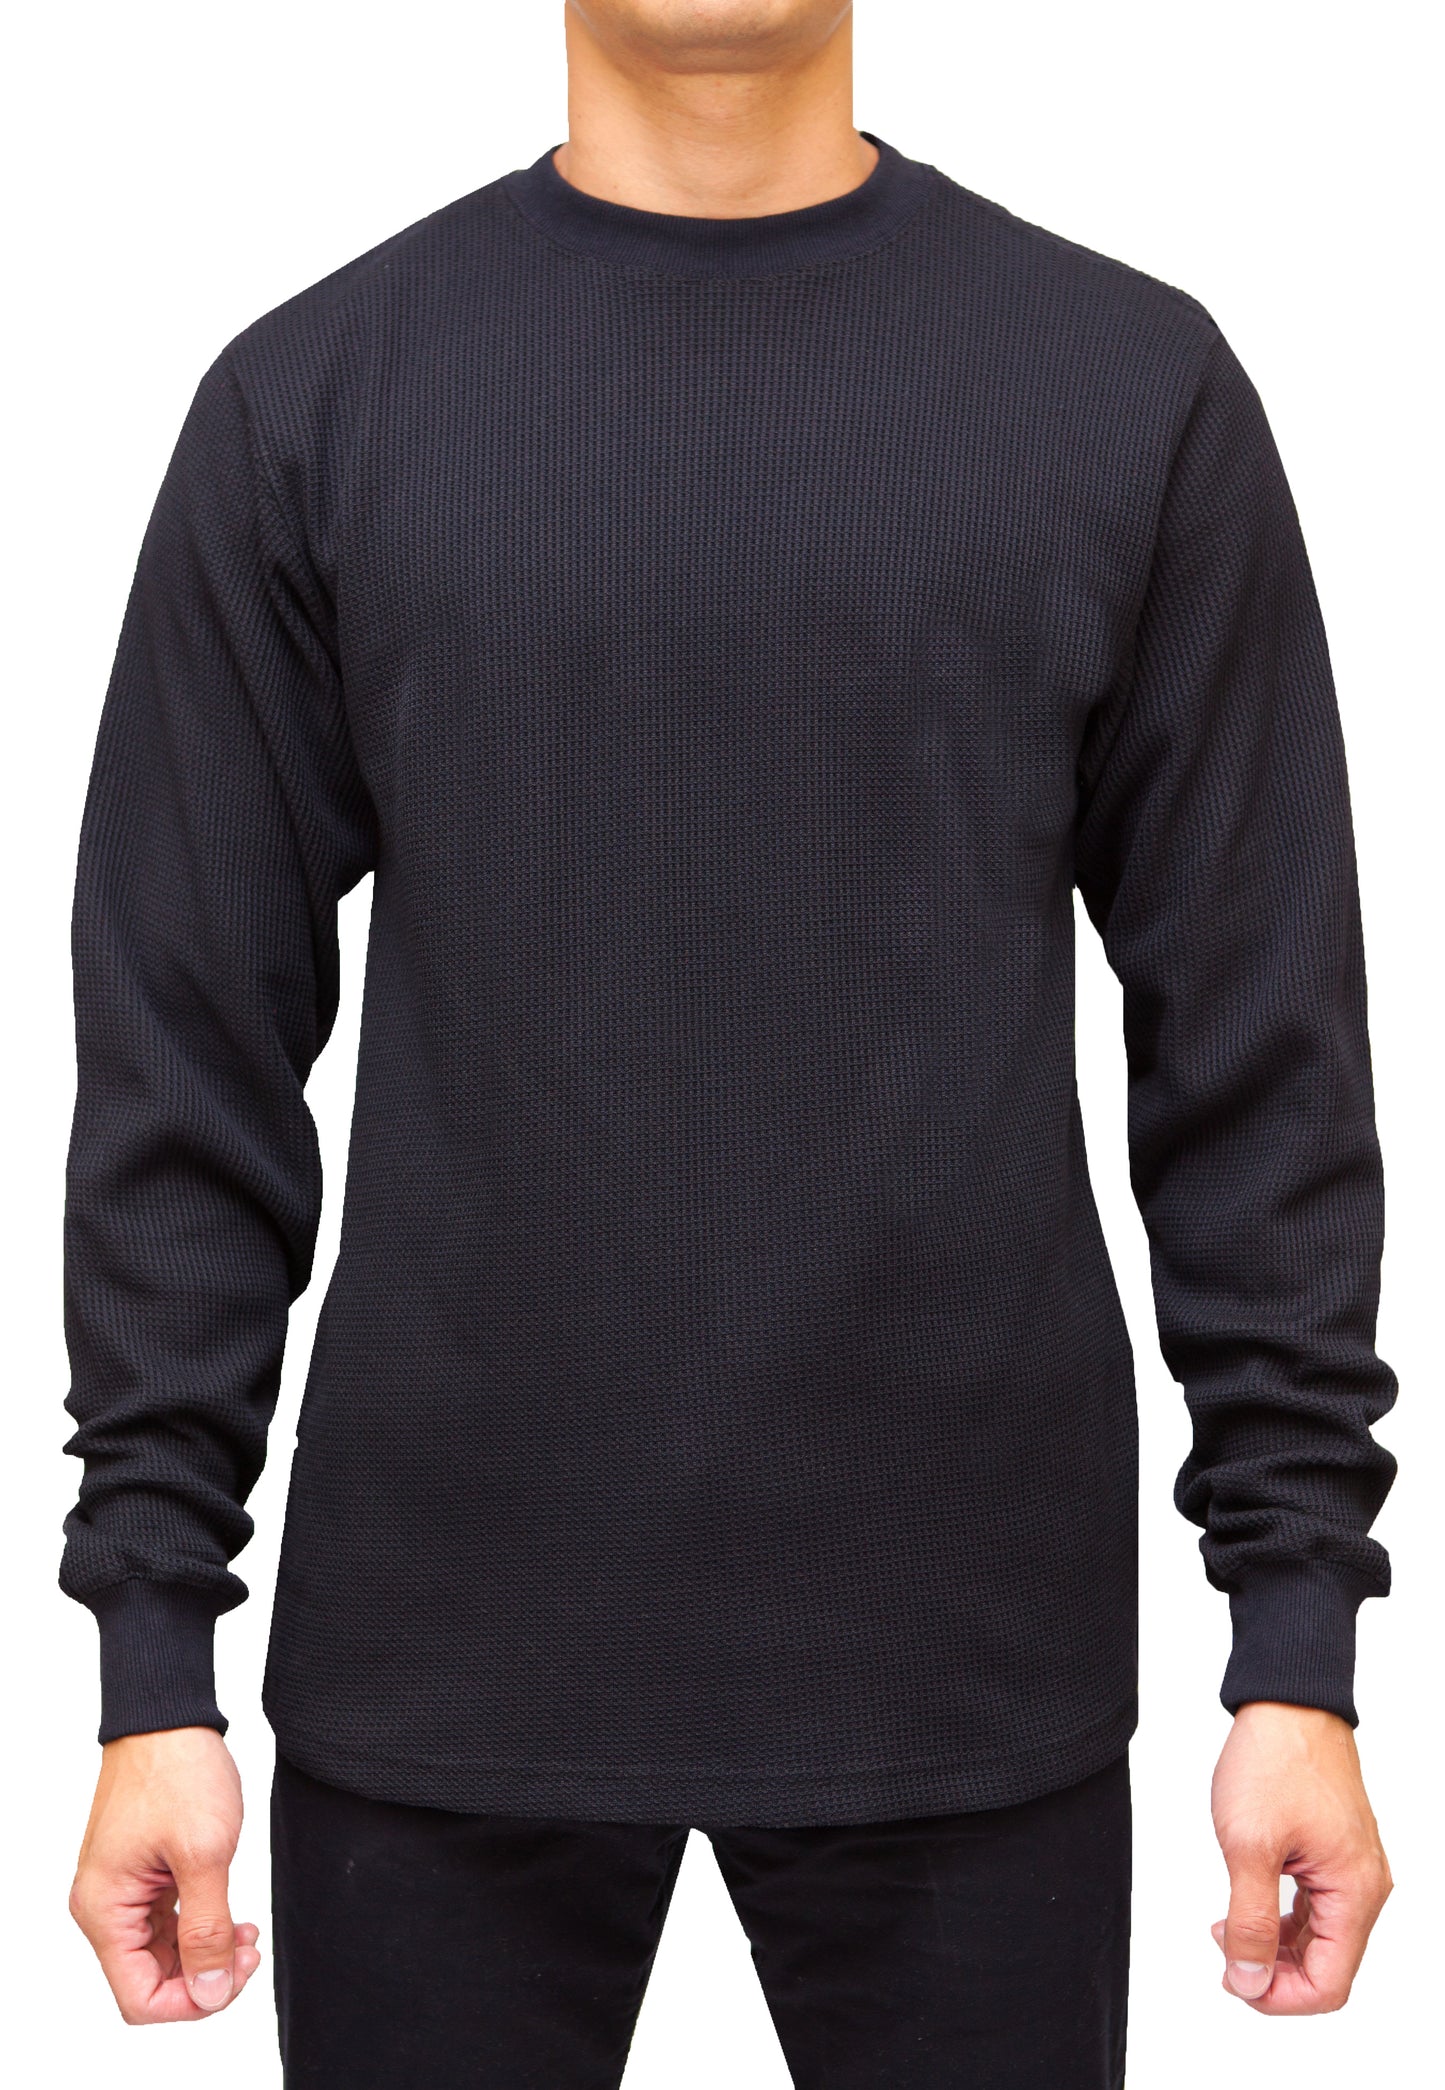 AT11-Access Men's Heavyweight Long Sleeve Thermal Crew Neck Top